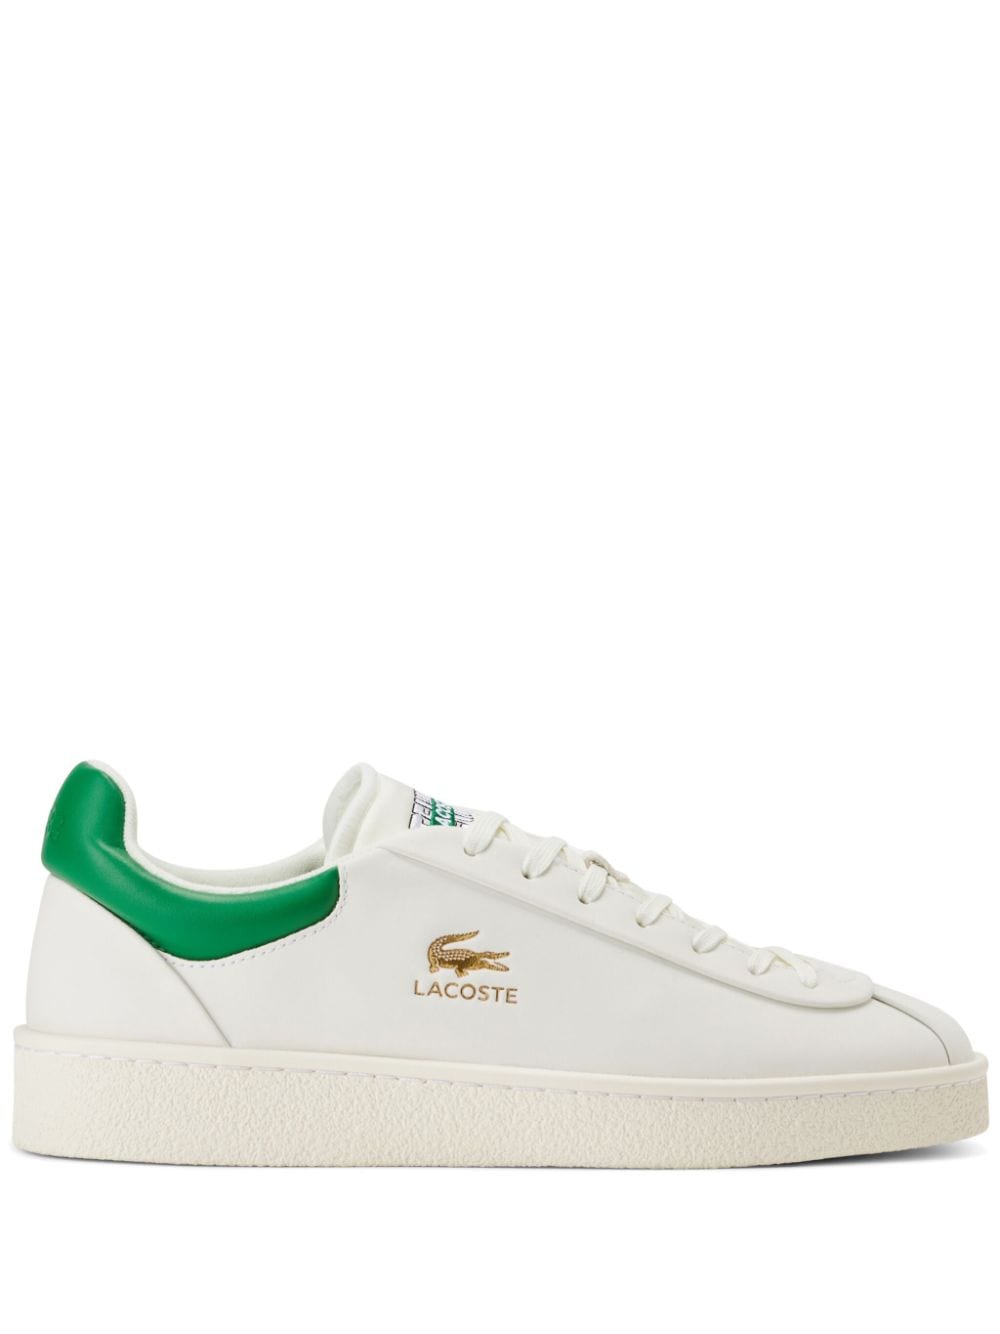 Lacoste Baseshot leather sneakers - White von Lacoste